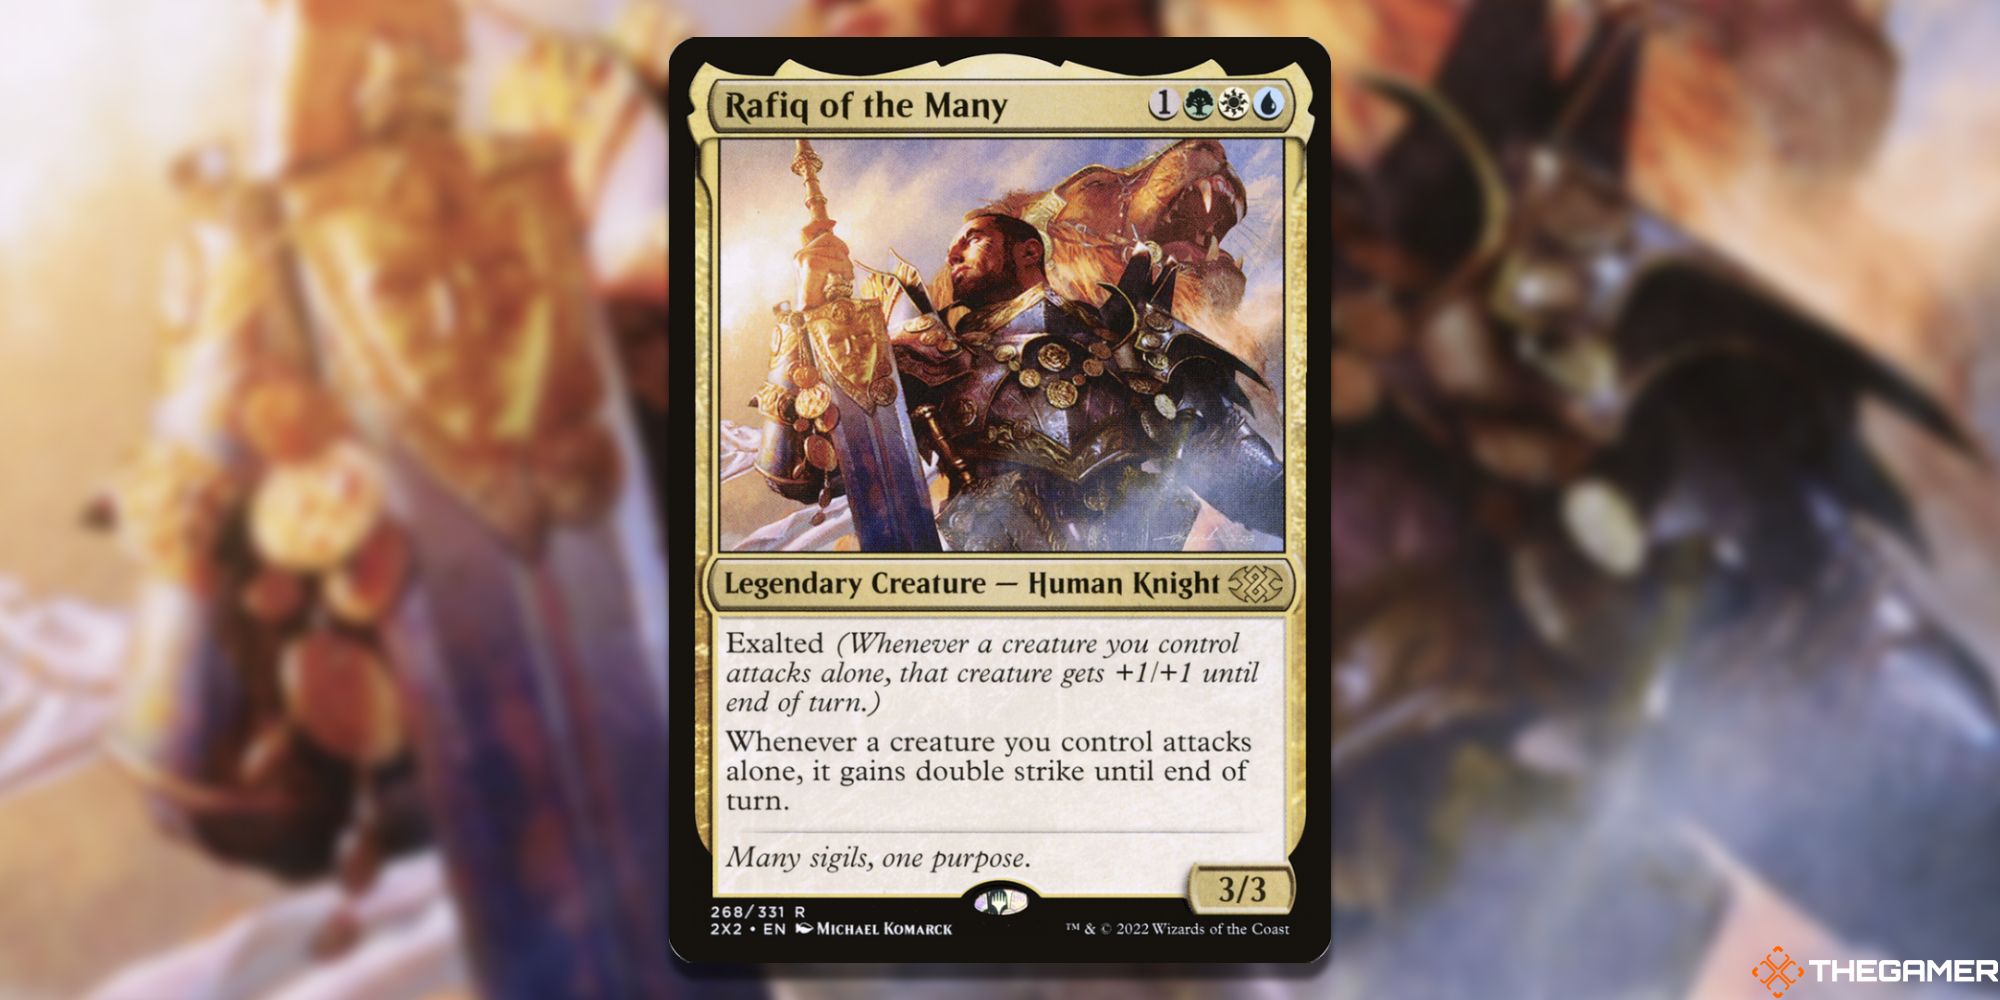 Image of the Rafiq of the Many card in Magic: The Gathering, with art by Michael Komarck